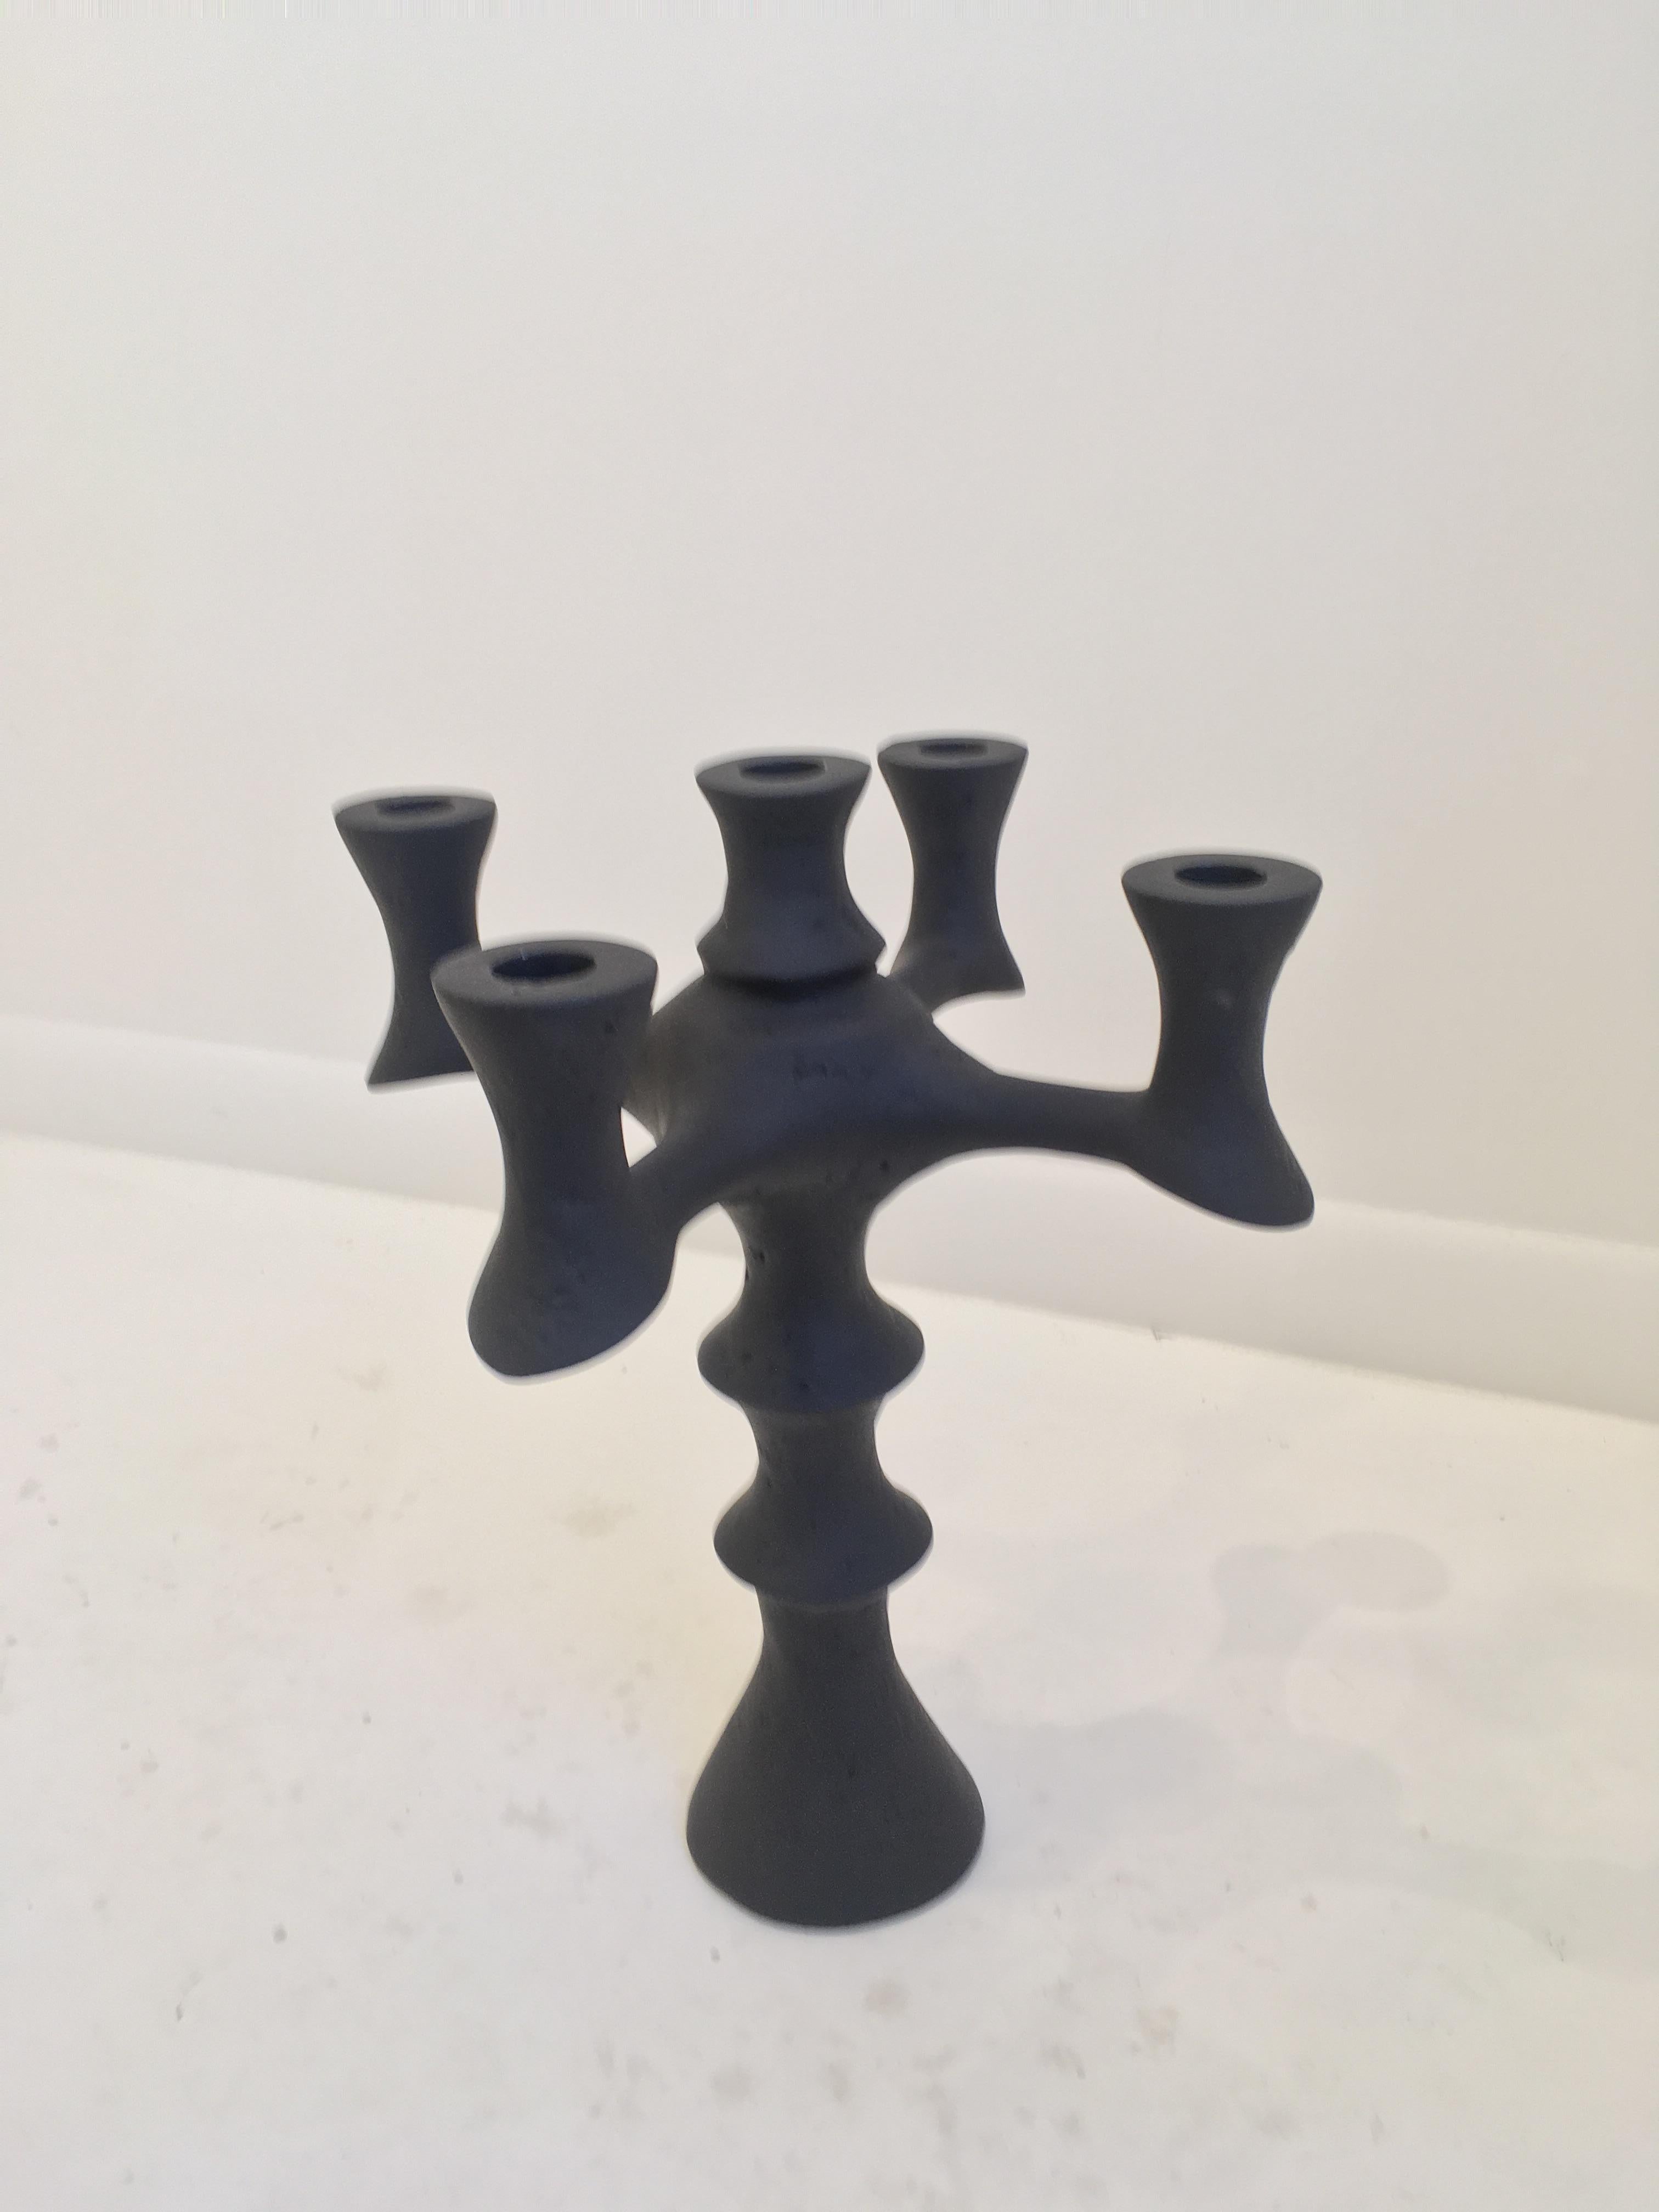 Sculpted plaster of Paris candleholder. A reminiscent of Giacometti's work, this five candleholder has a sleek yet elegant design. With its soft edges and texture it makes for an outstanding centerpiece for any console or table. Candleholders have